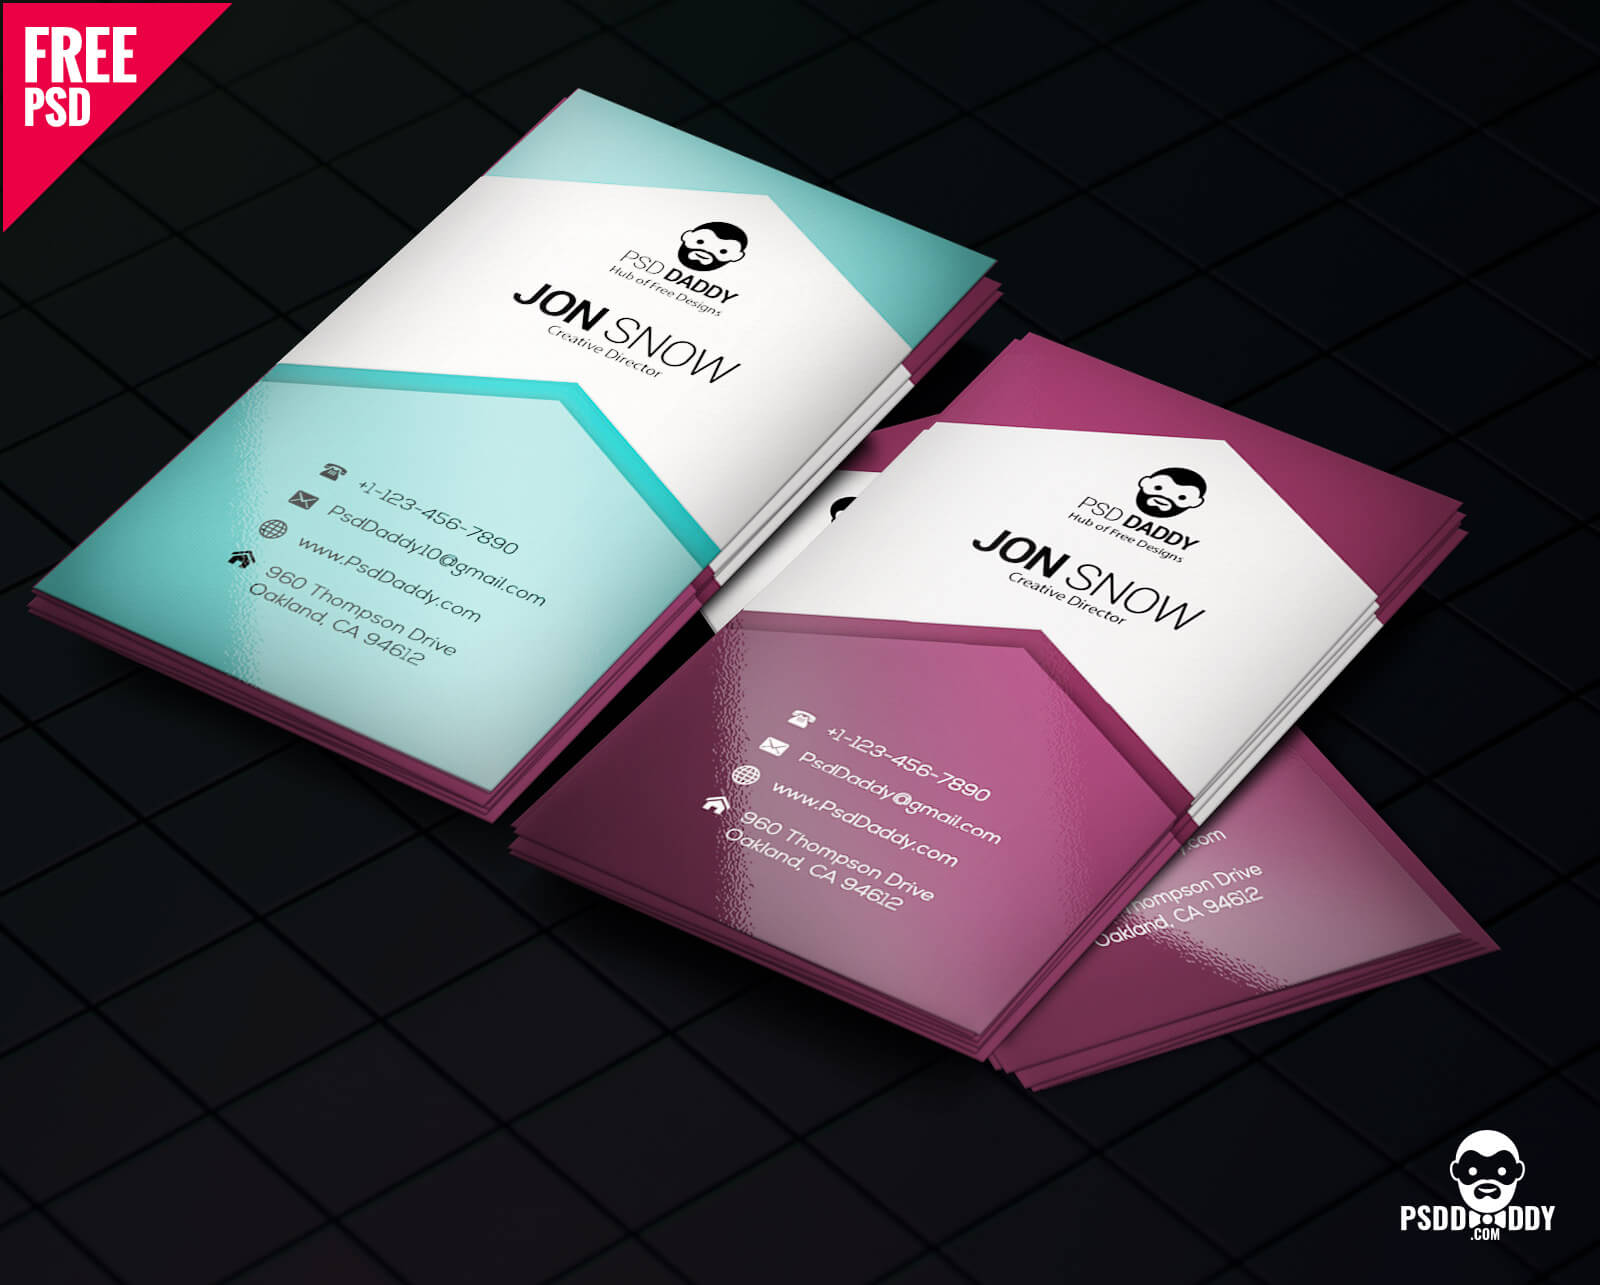 Download]Creative Business Card Psd Free | Psddaddy Intended For Business Card Size Psd Template